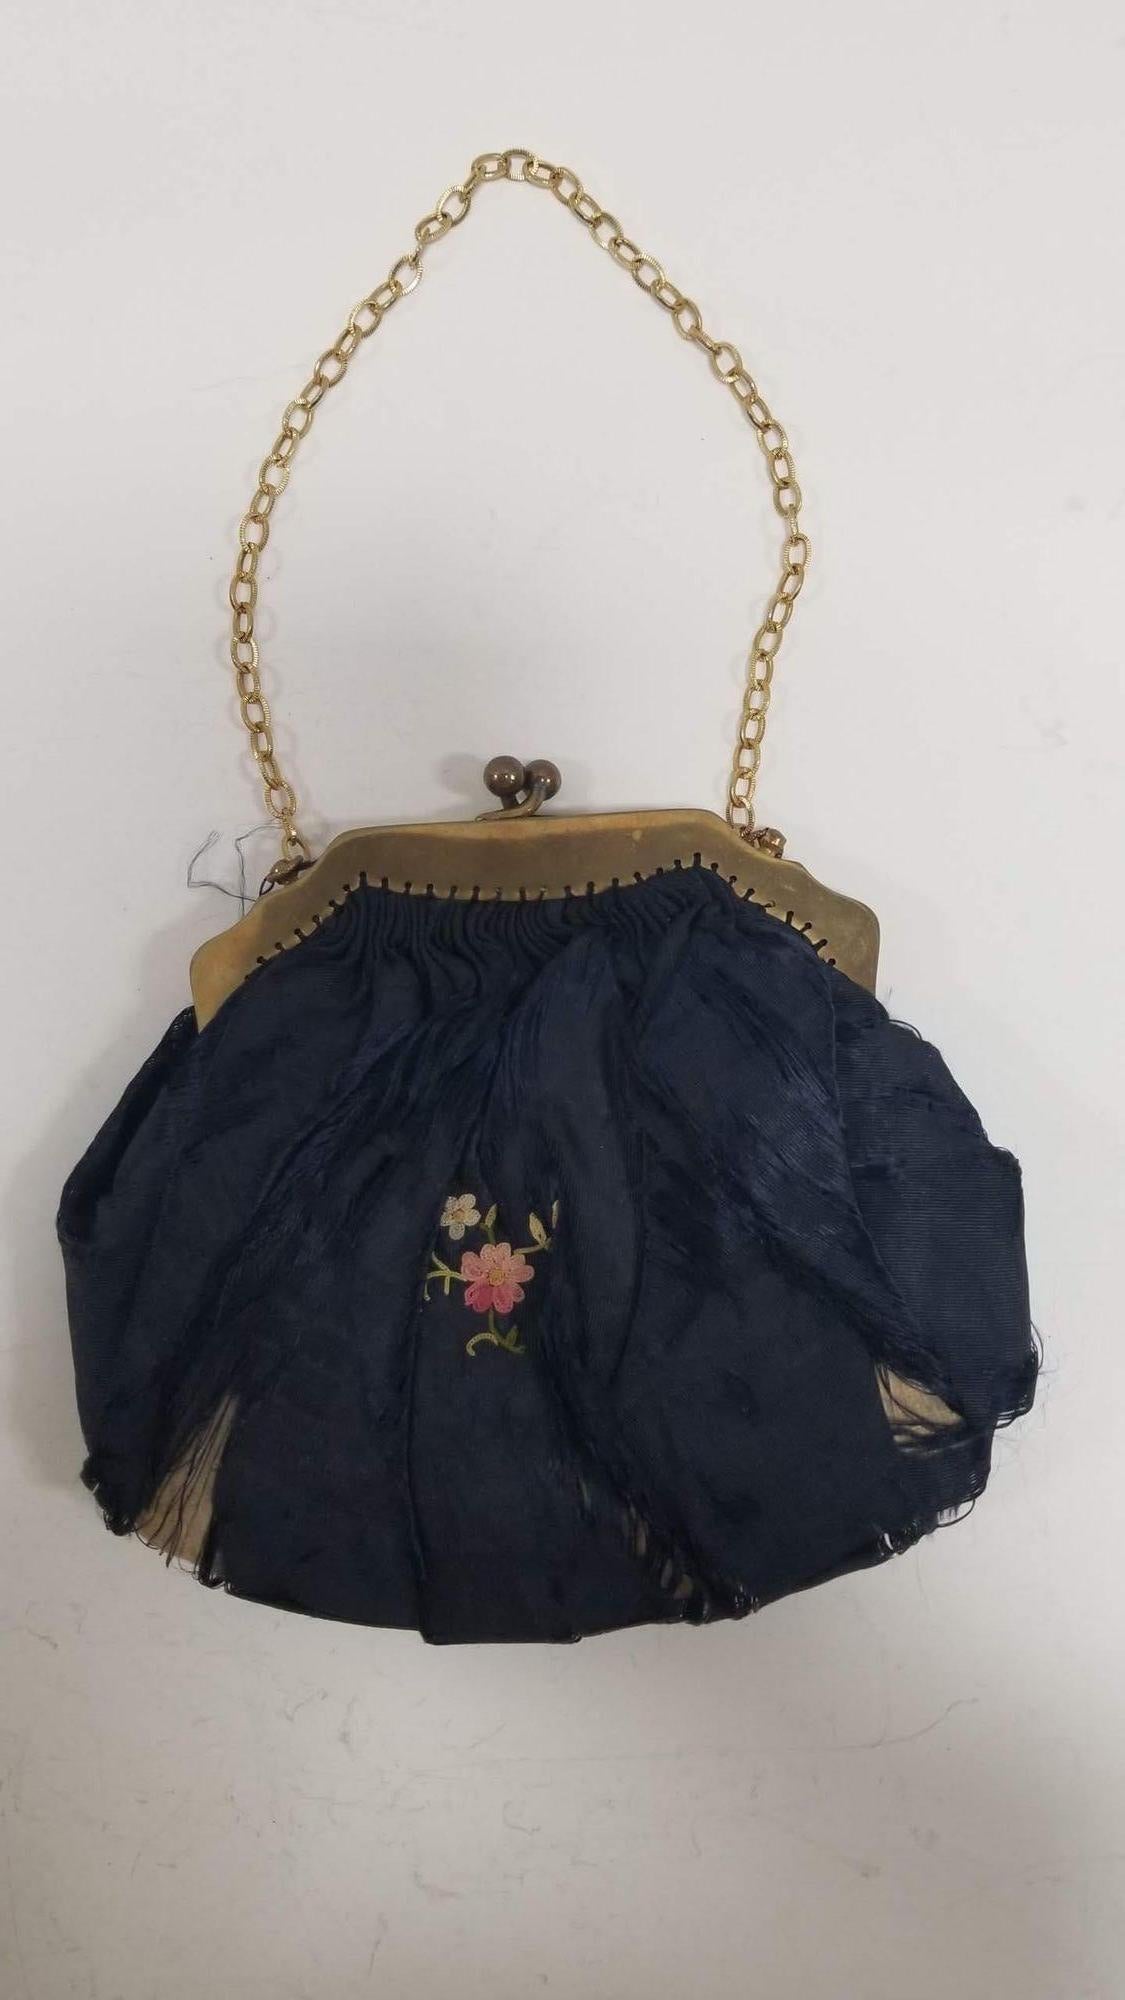 Elevate your style with this exquisite antique hand-embroidered silk purse dating back to 1910, a true testament to the craftsmanship of a bygone era. The intricate embroidery on the silk fabric reflects the artistry and attention to detail that was